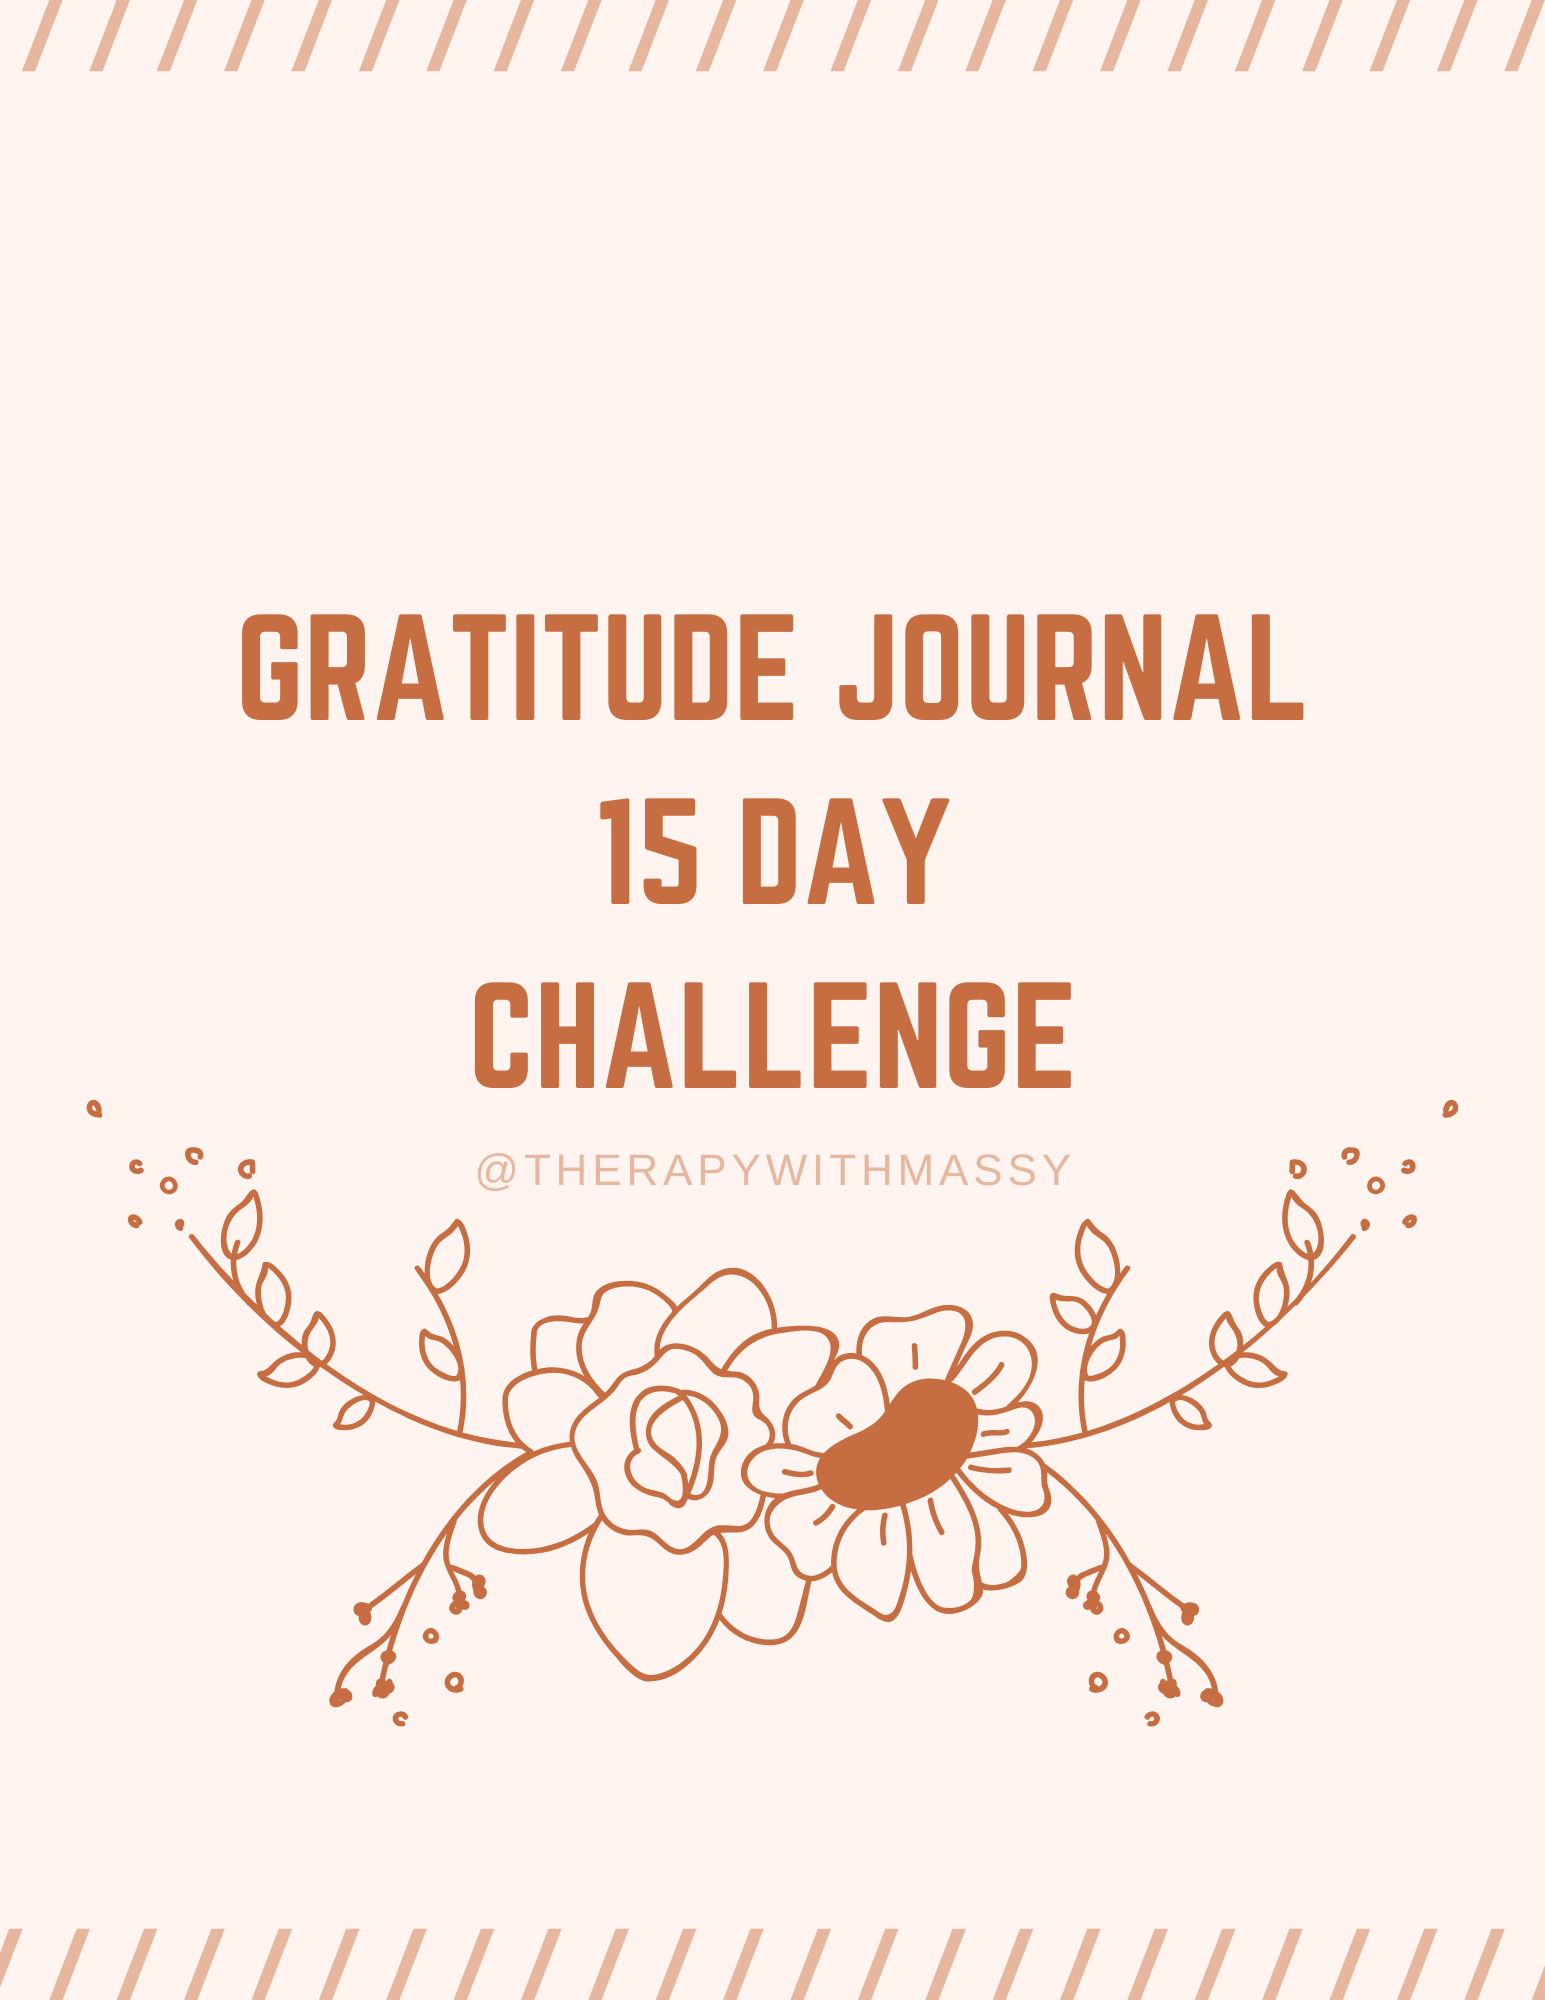 Click here to access our Gratitude Journal and start the 15 day challenge!